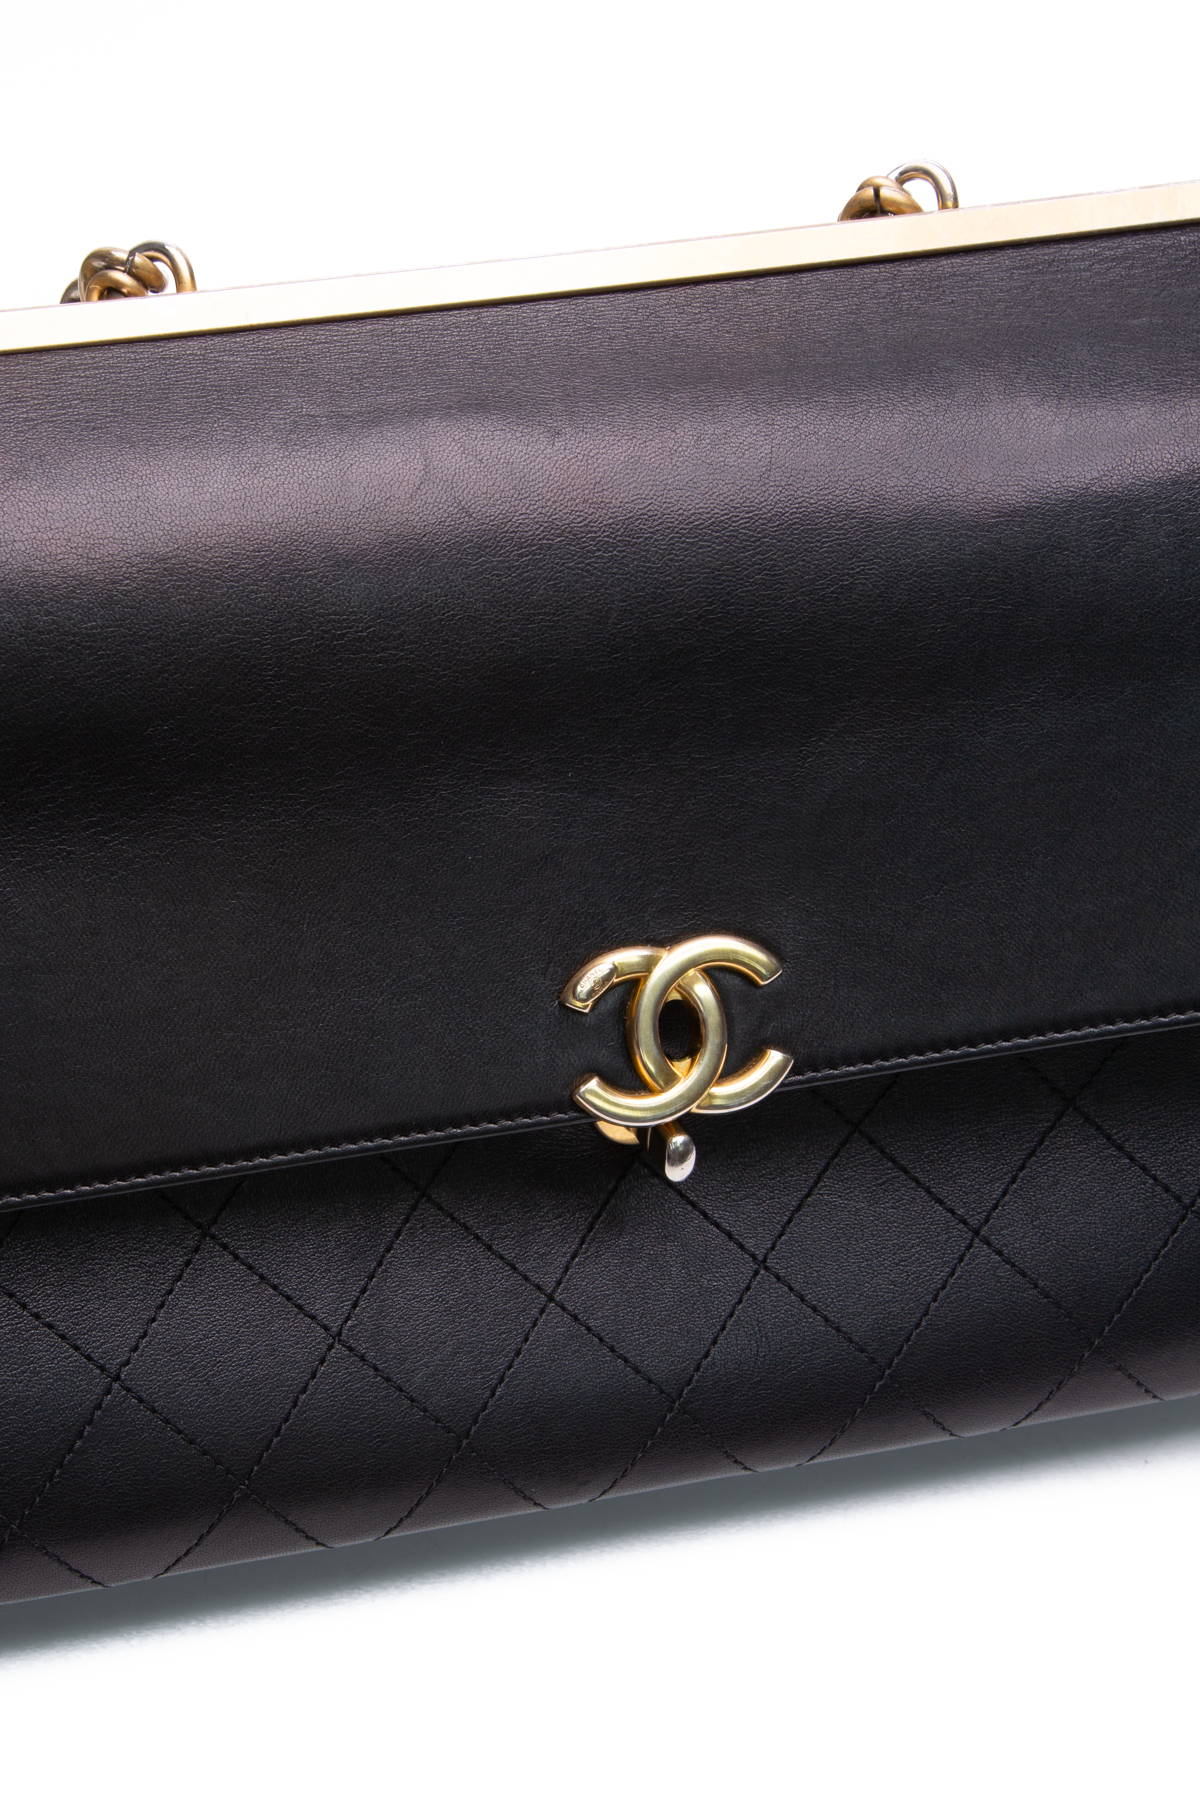 Chanel small coco luxe flap bag black